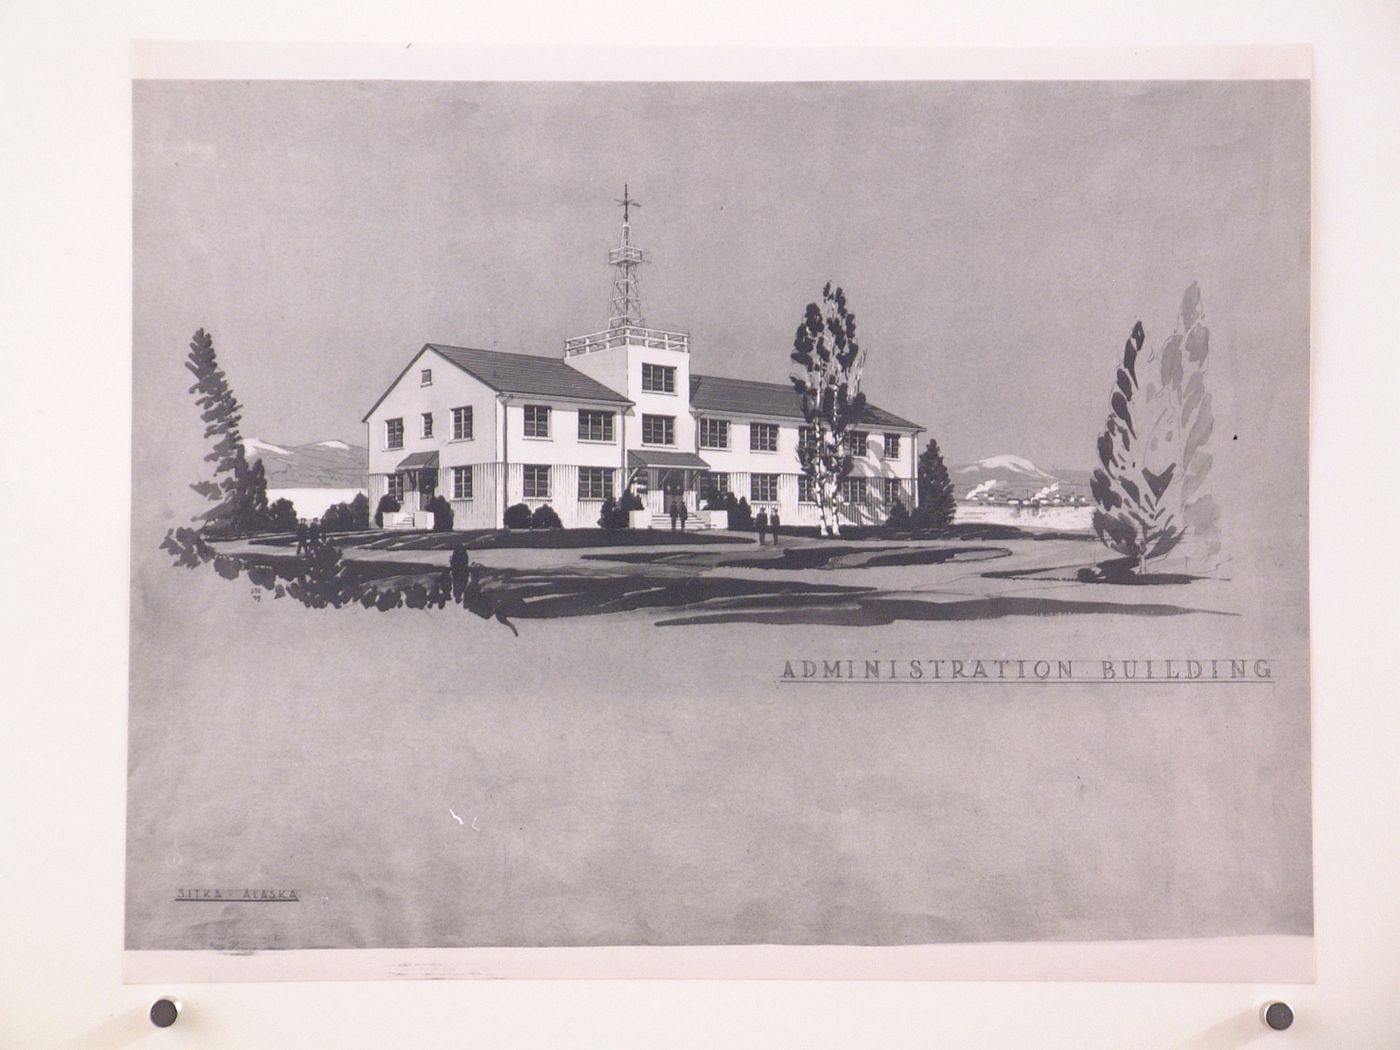 Photograph of a perspective drawing for or of the Administration Building, United States Naval Air Base, Sitka, Alaska